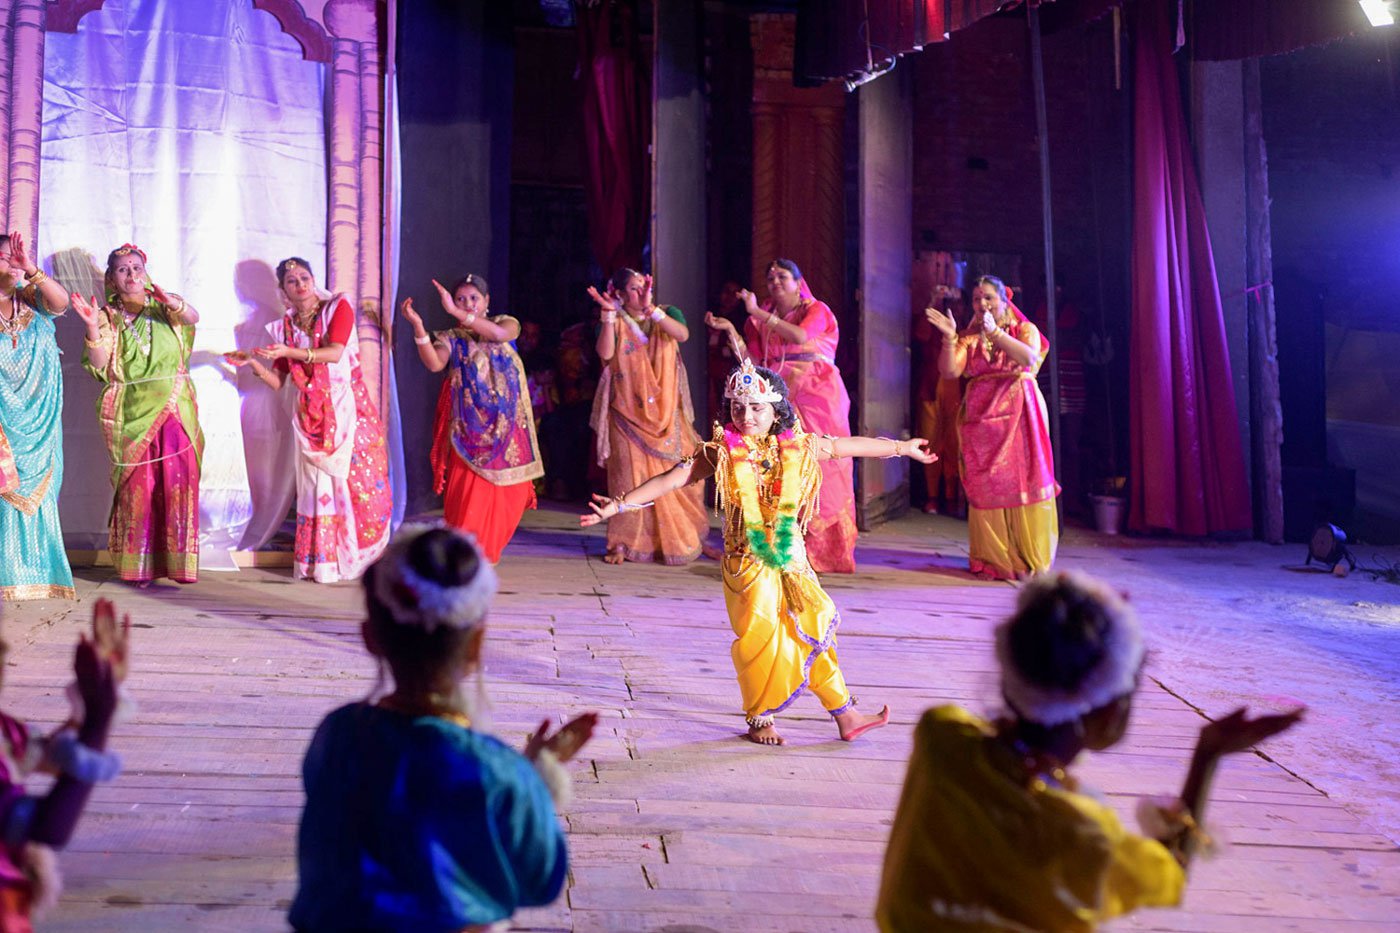 A young Lord Krishna dances with gopis in Vrindavan